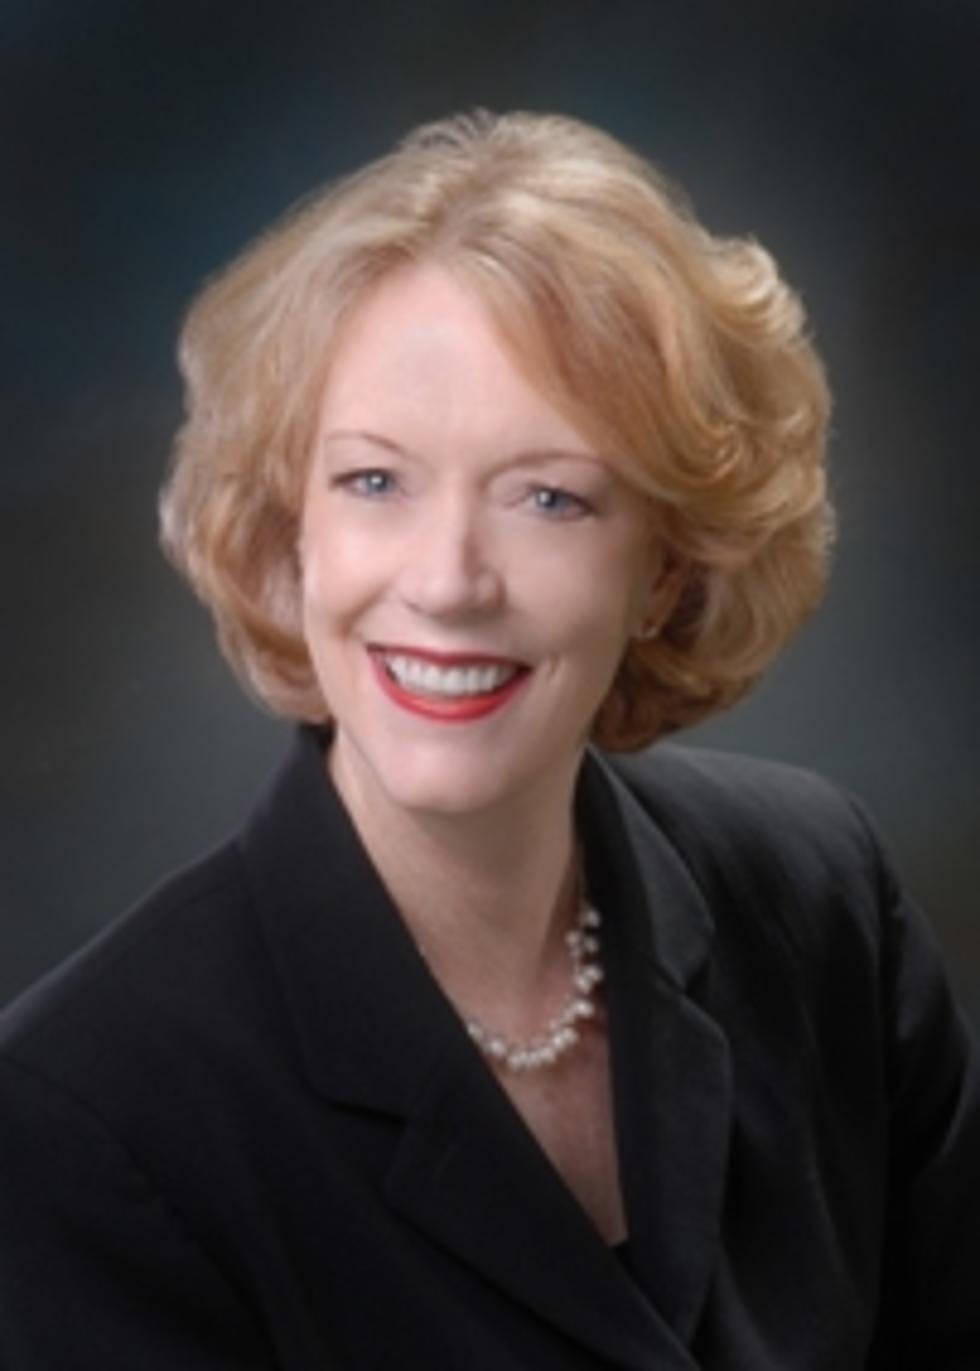 Should Lubbock City Manager LeeAnn Dumbauld Apologize to the Citizens of Lubbock? [POLL]